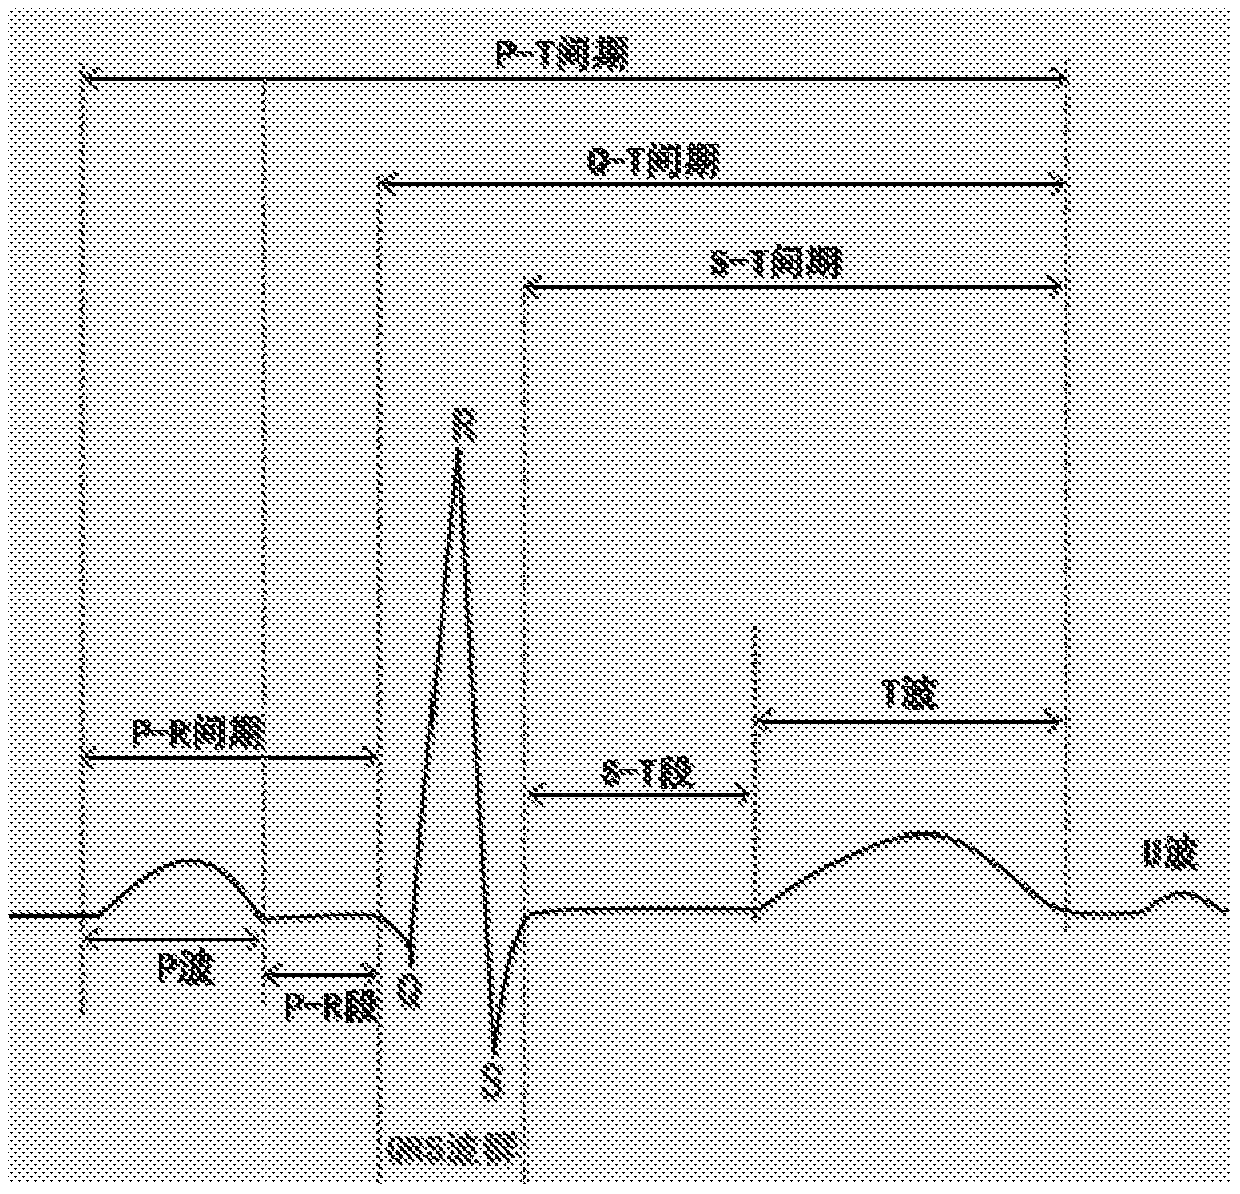 A kind of ecg signal processing method and device